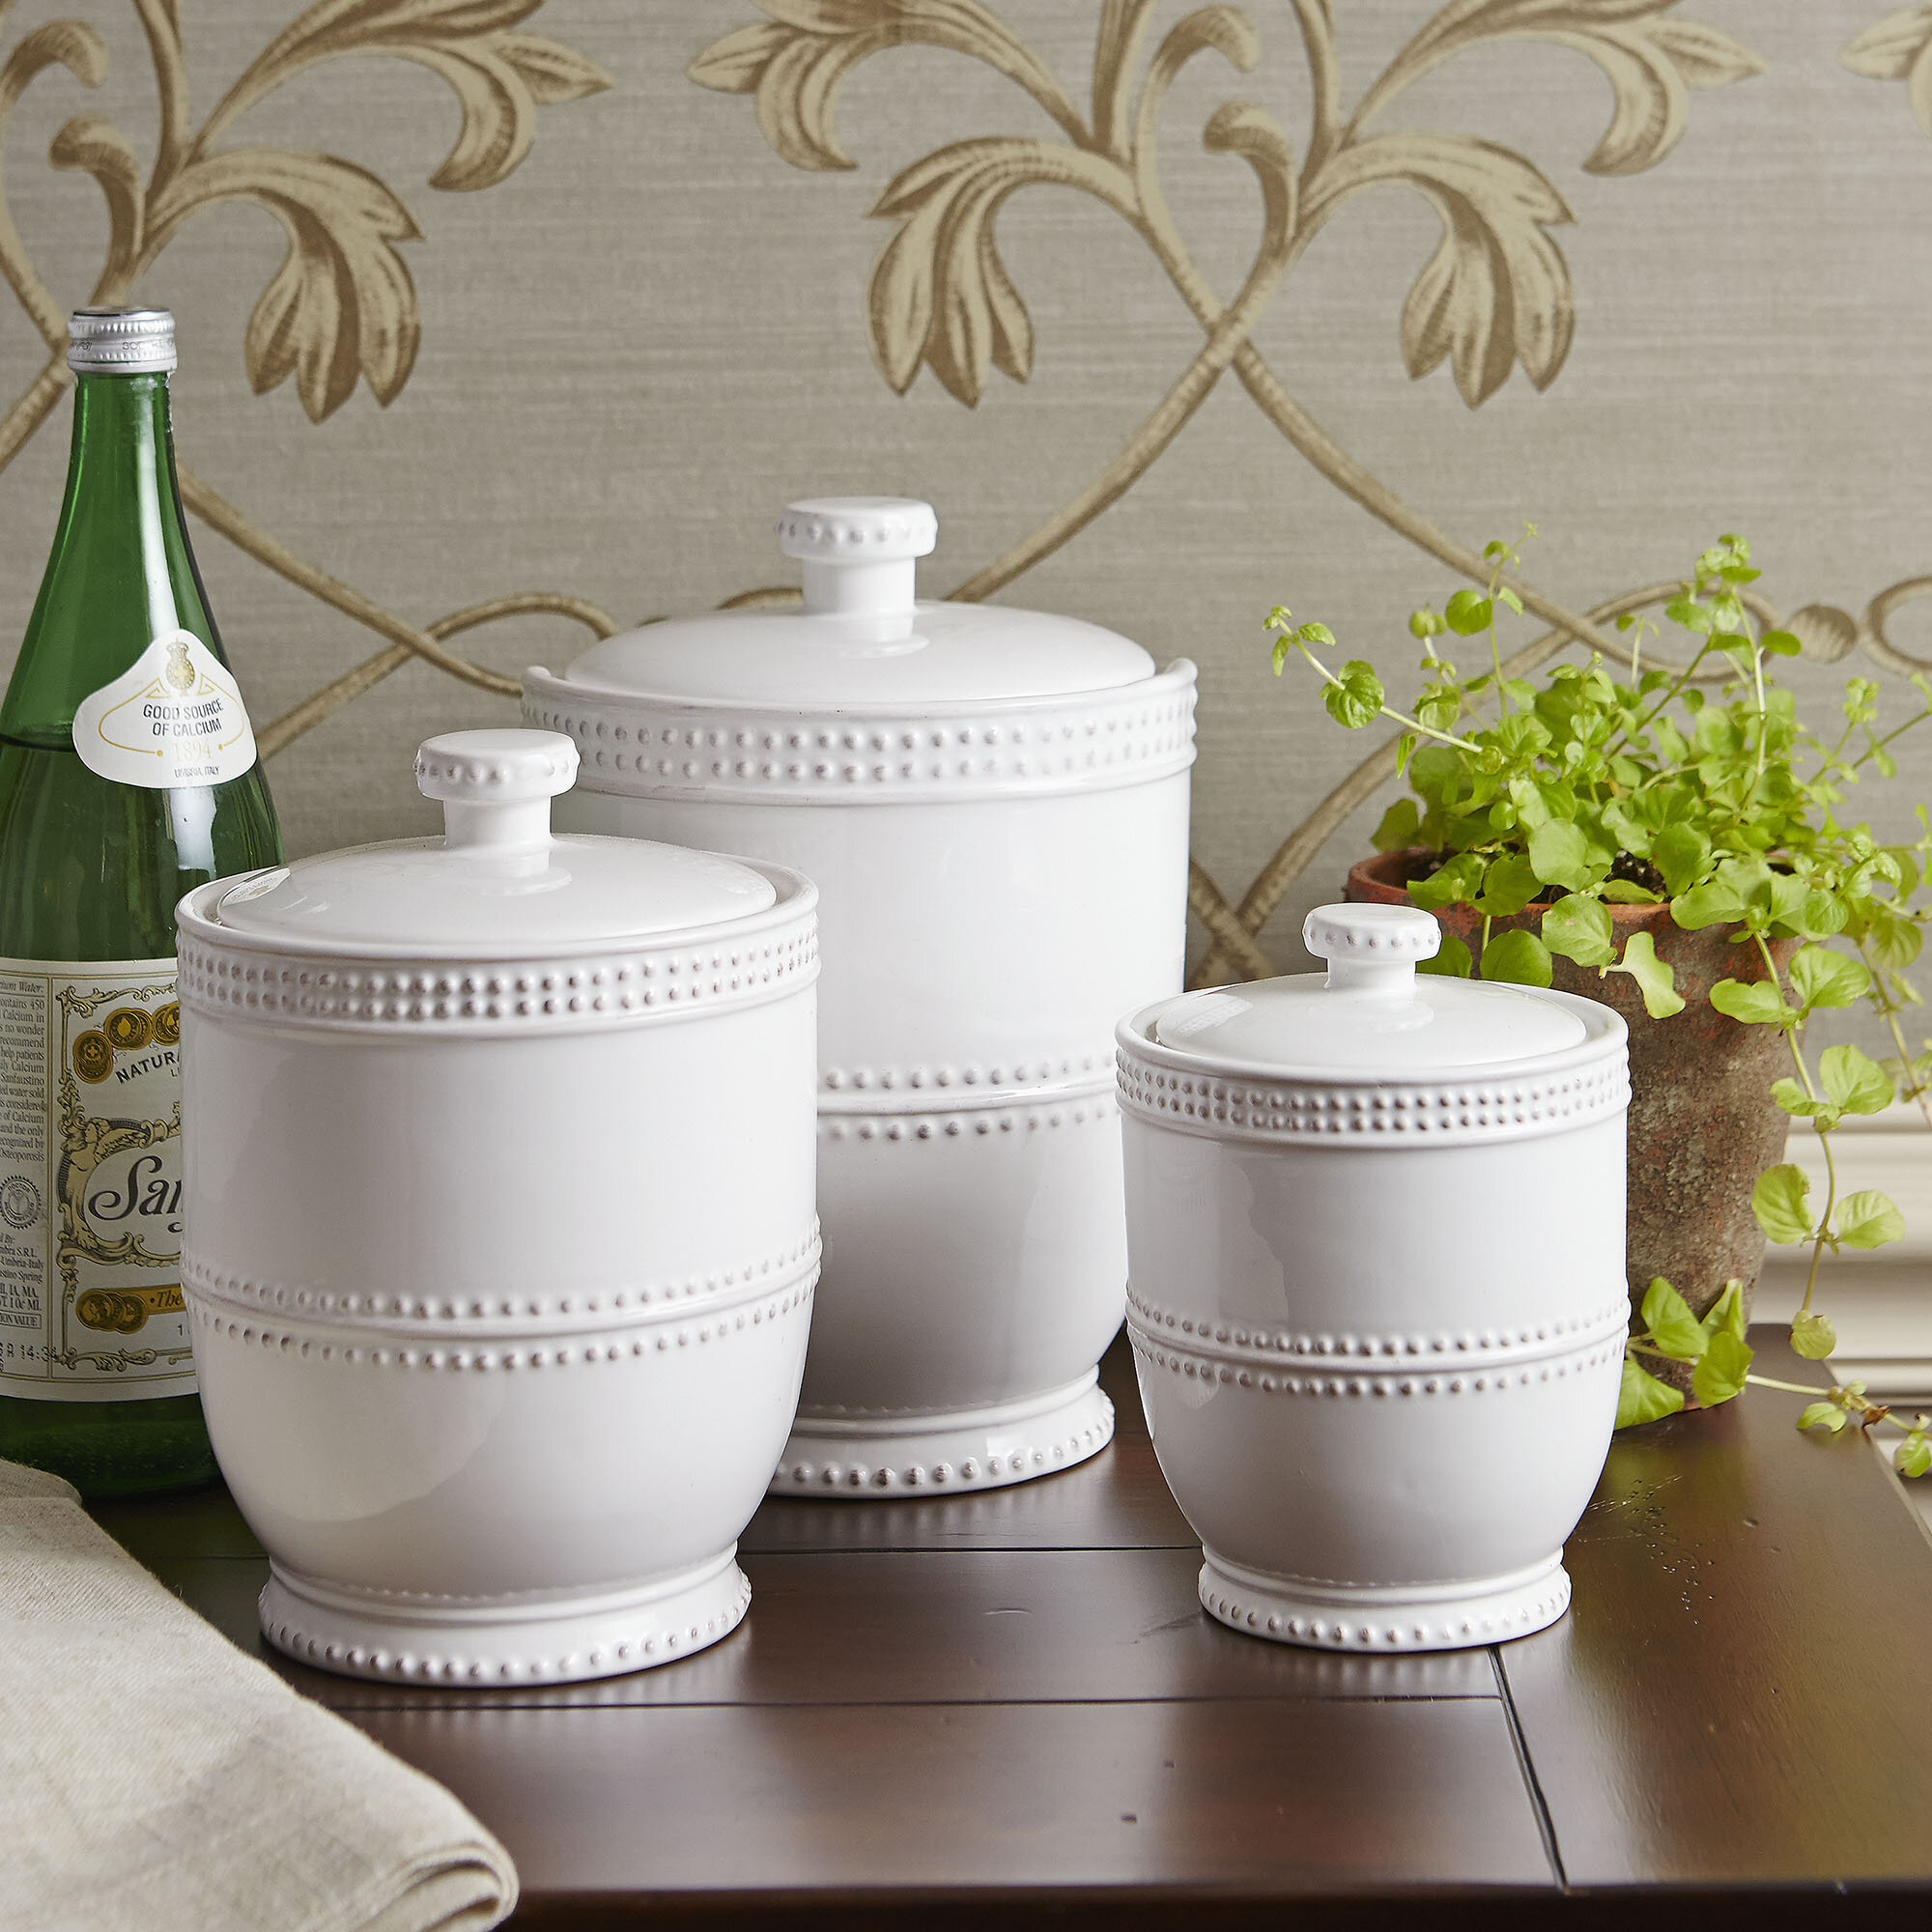 Decorative Kitchen Canisters Sets You'll Love in 2021